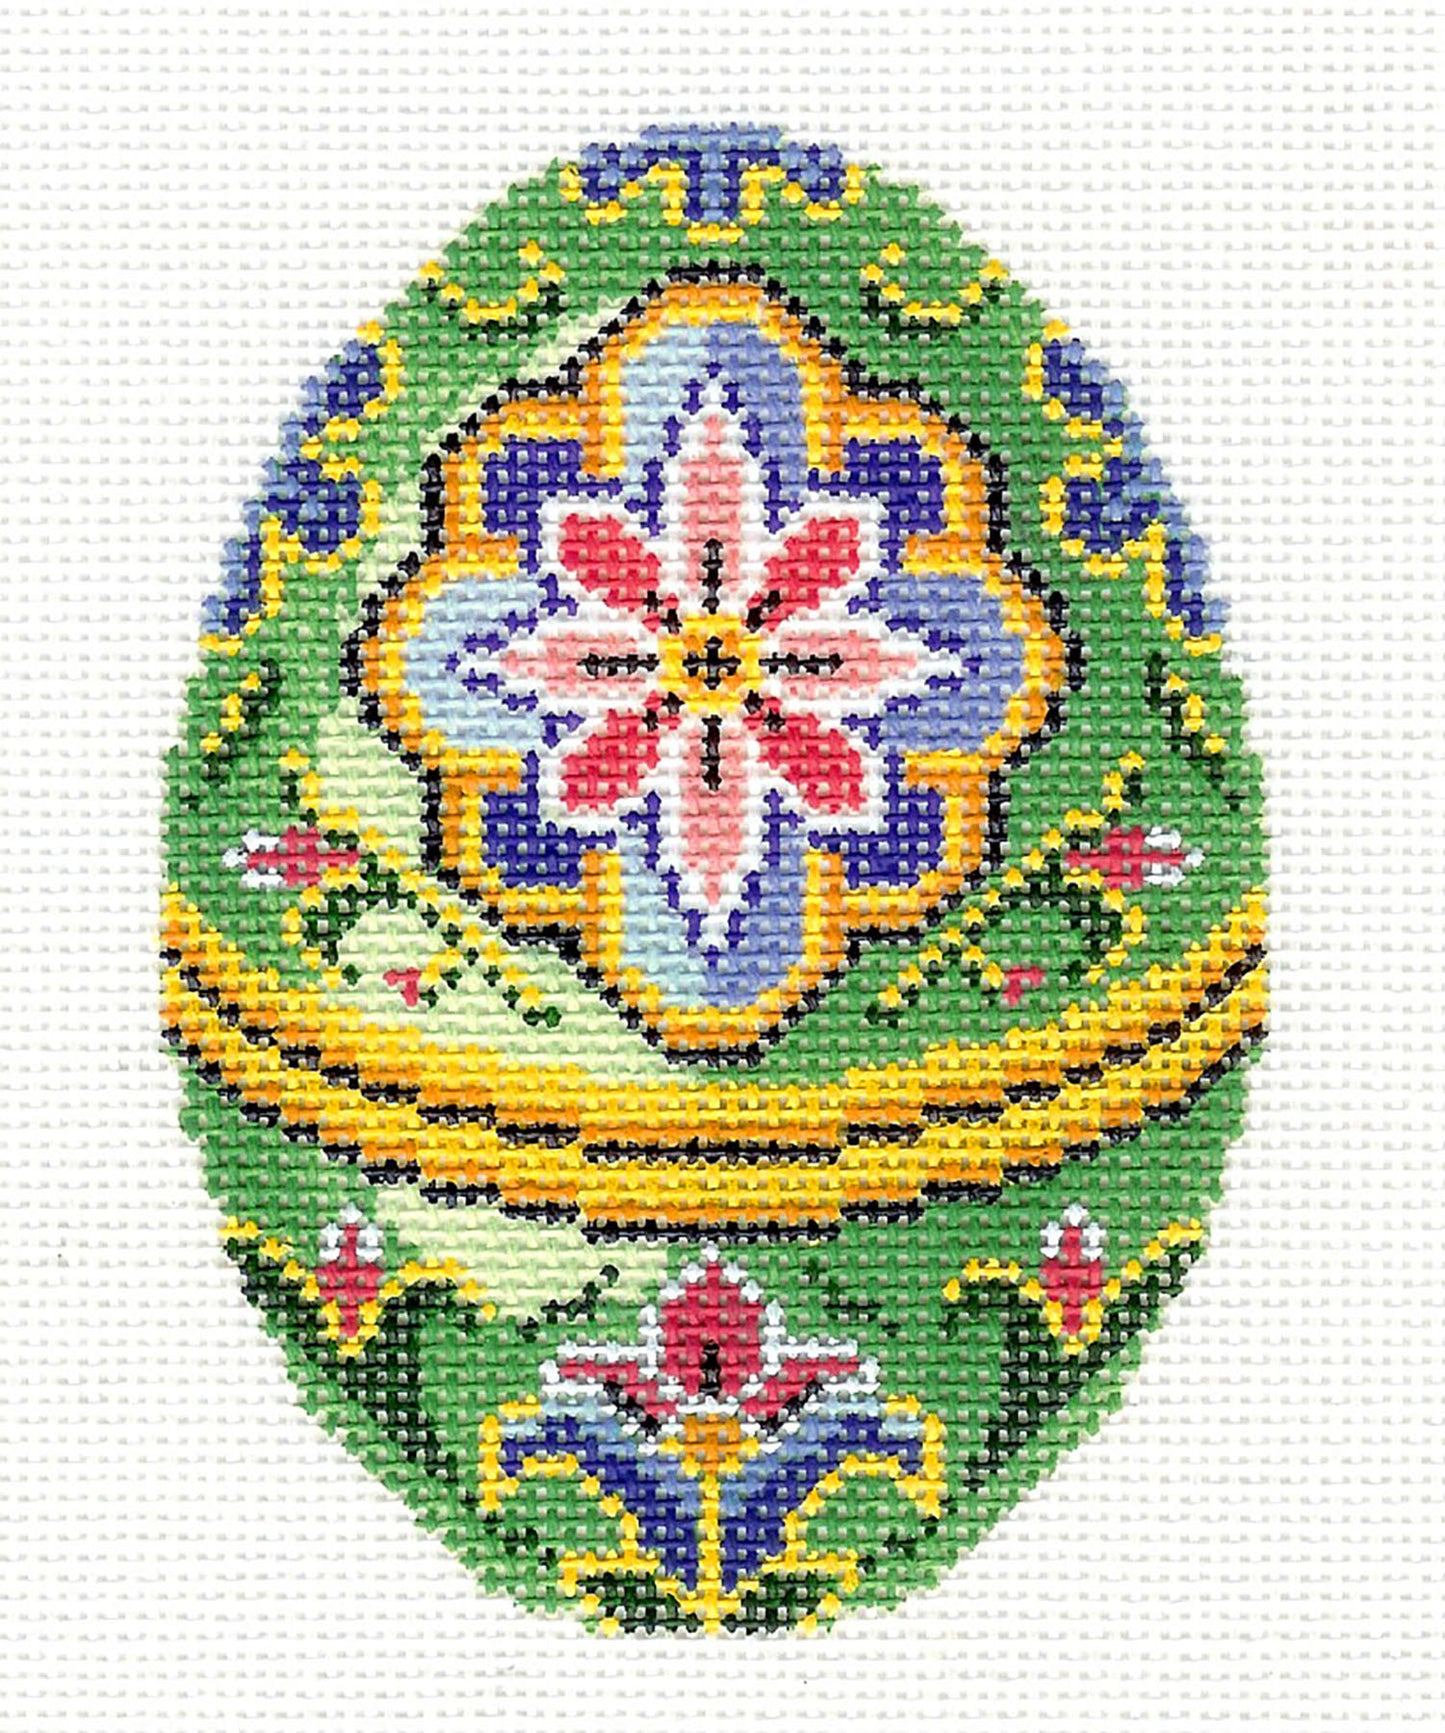 Faberge Egg ~ Jeweled Green Floral EGG handpainted 18 mesh Needlepoint Canvas or Ornament by LEE